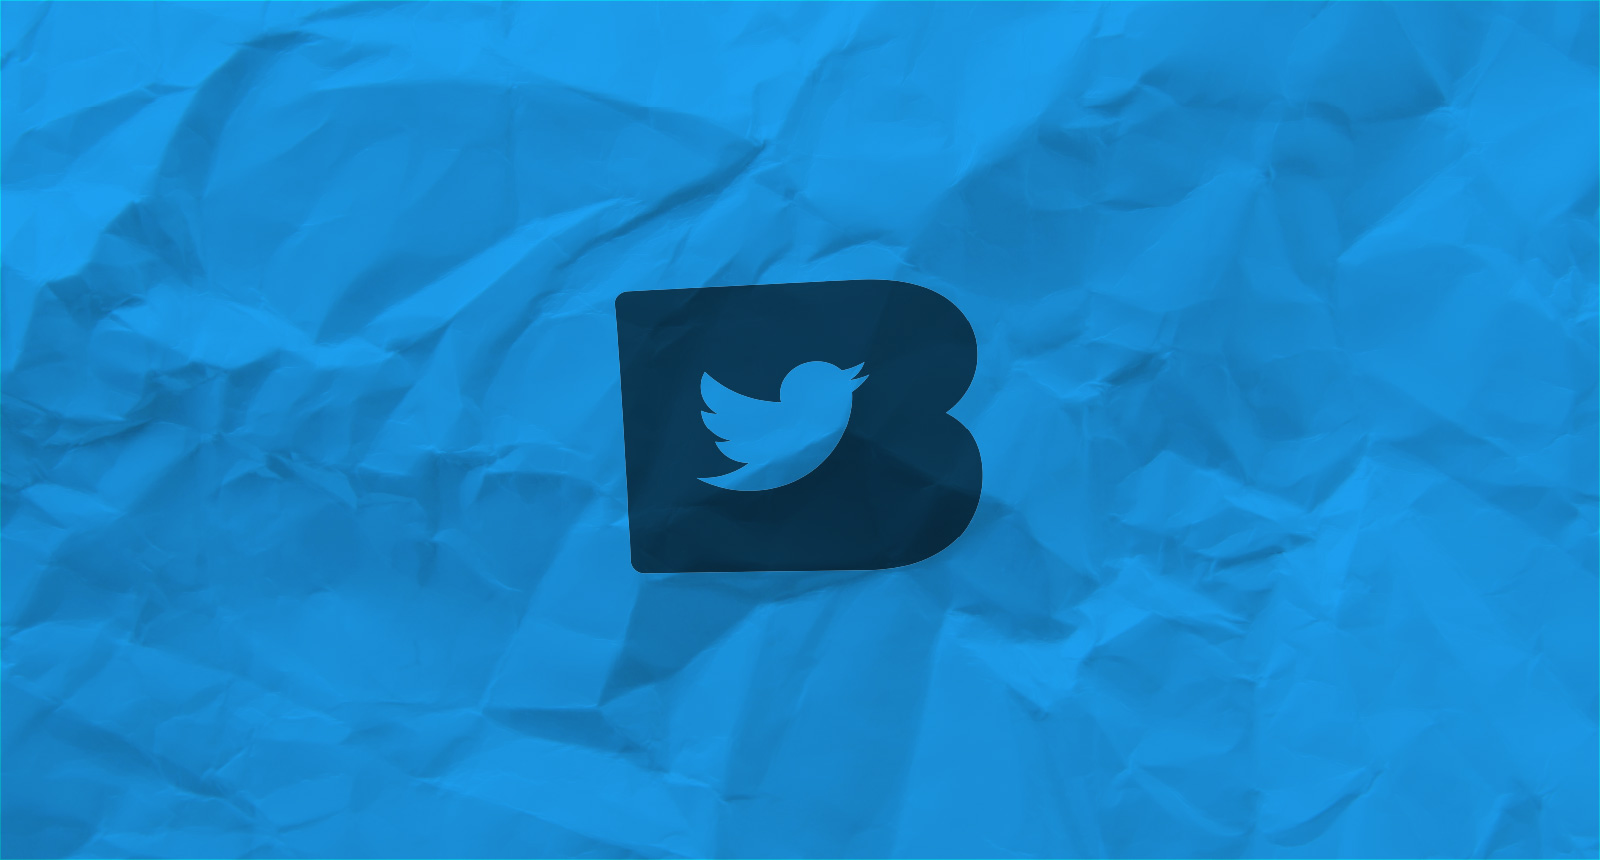 Twitter Blue is now available on Android at the same price as iOS